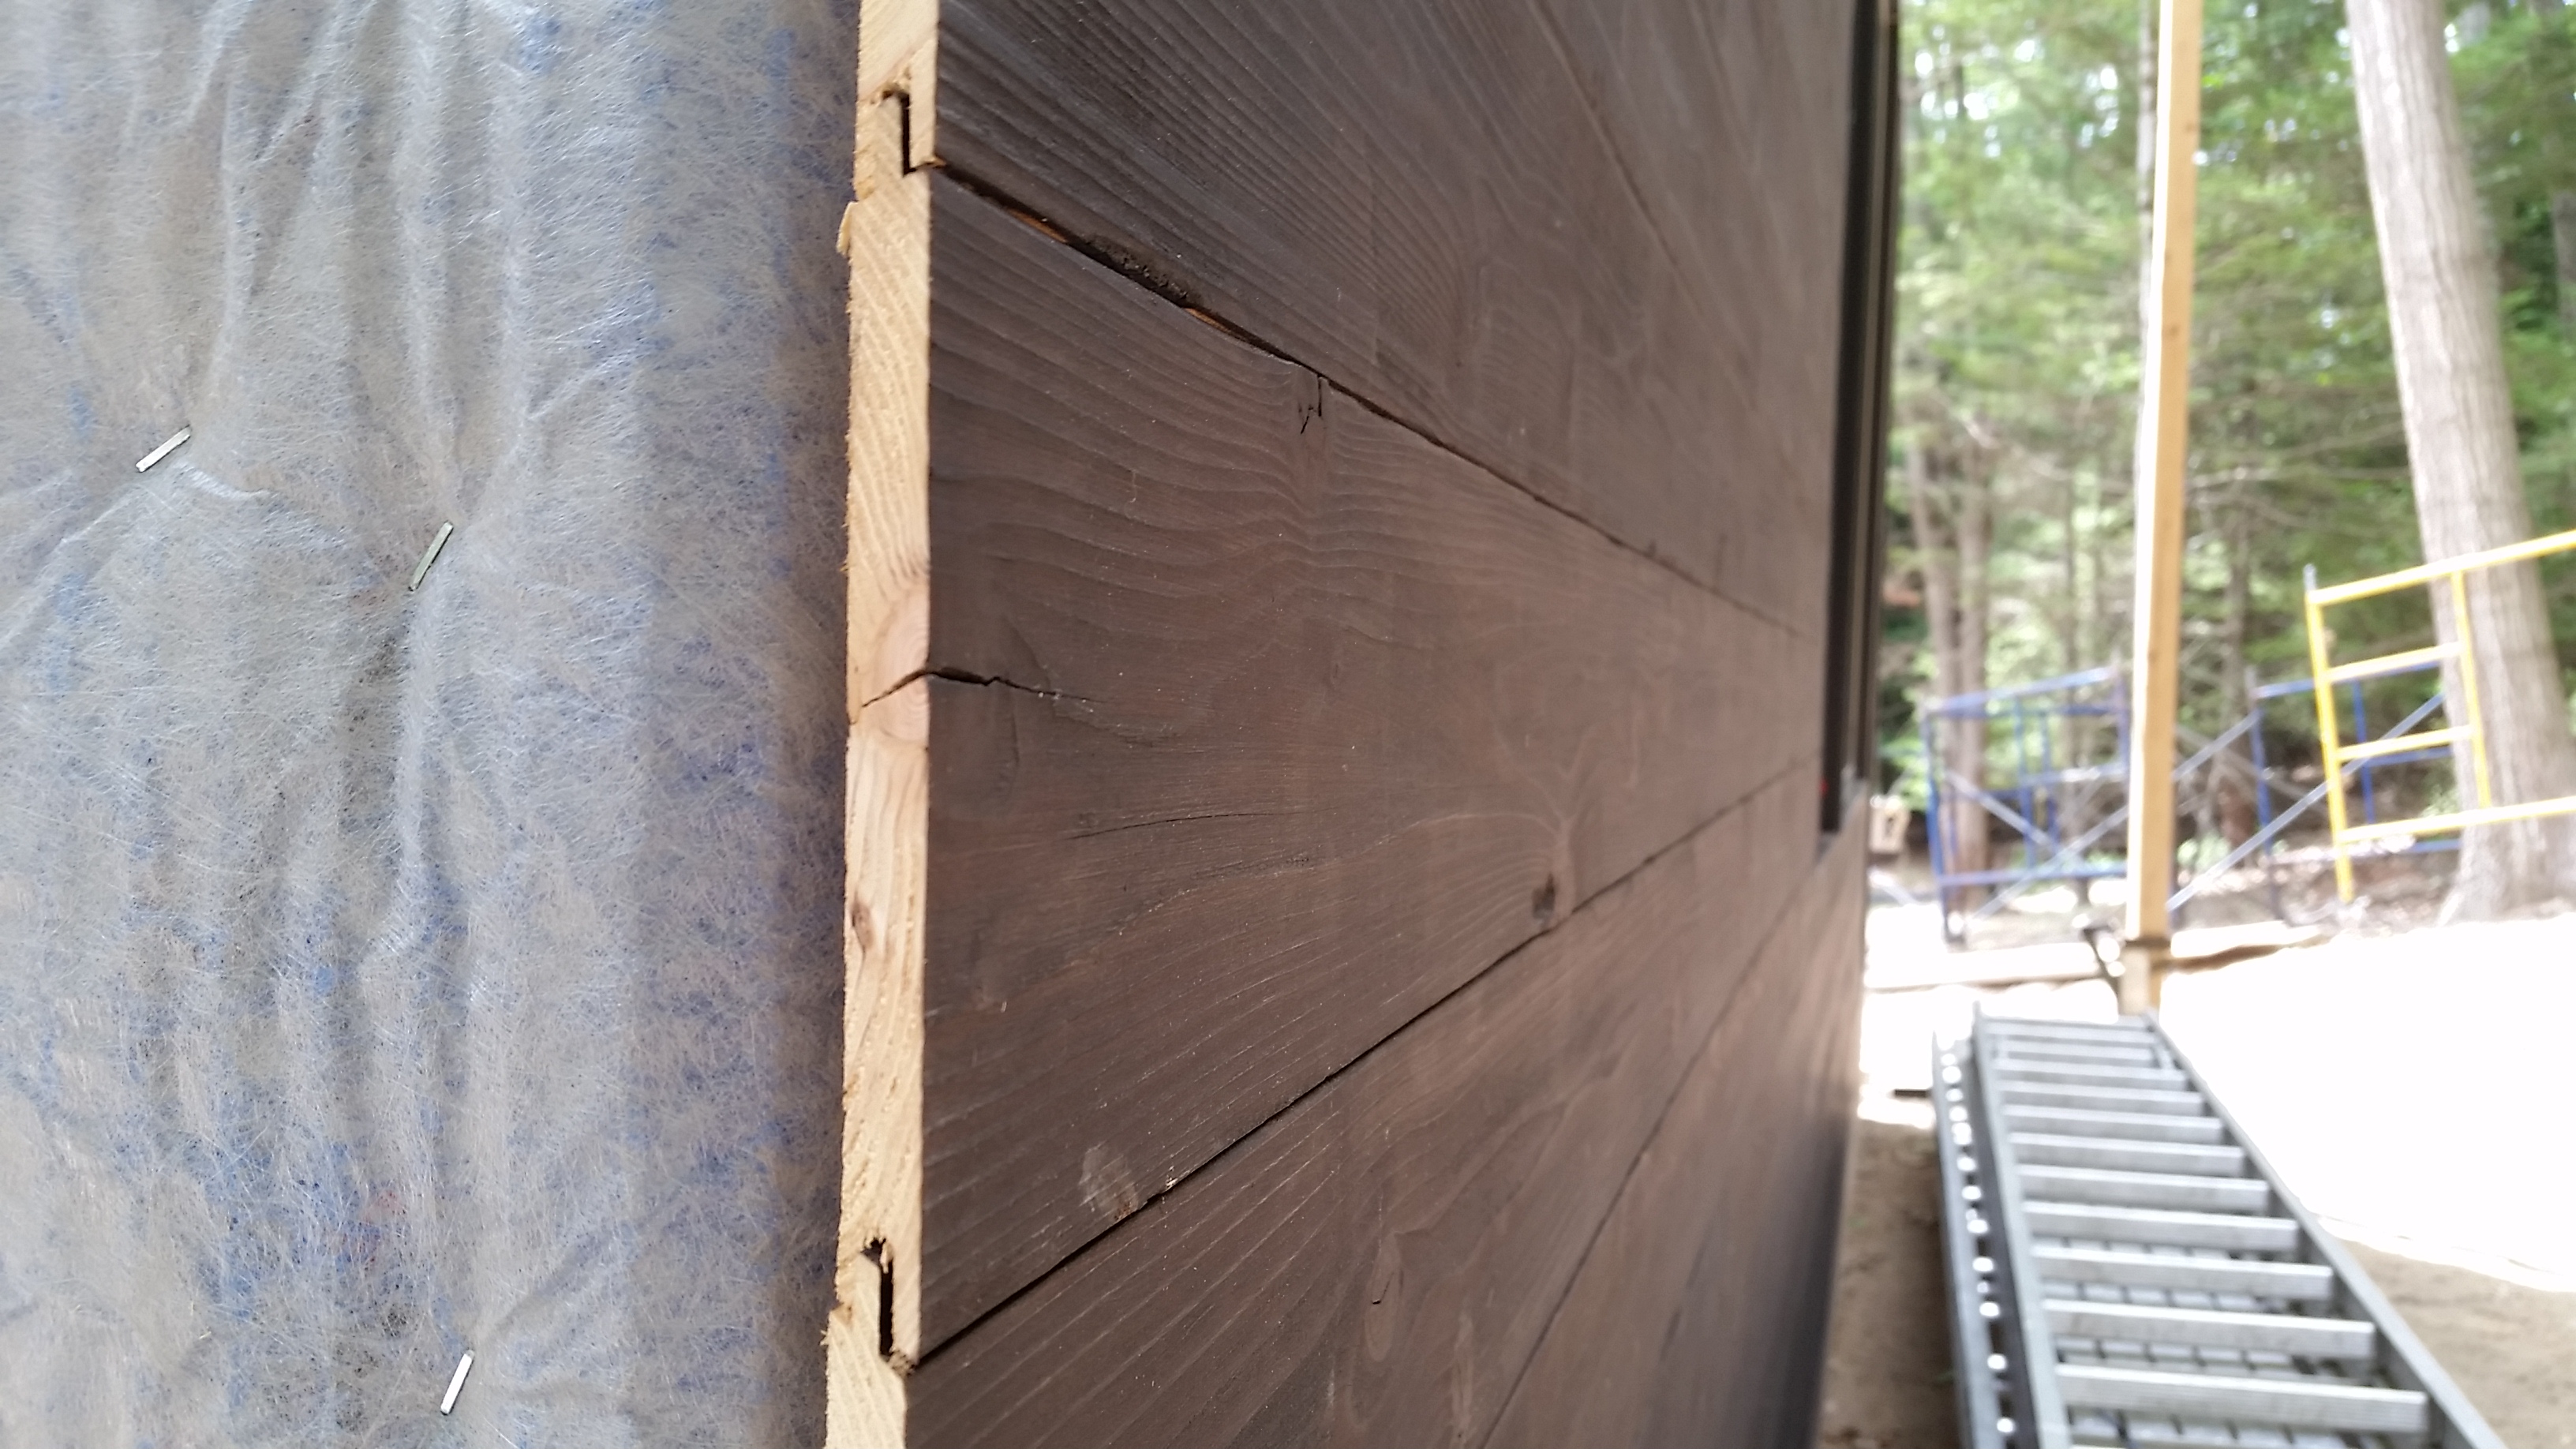 TinkerBox - Charred Wood Siding - Construction Update